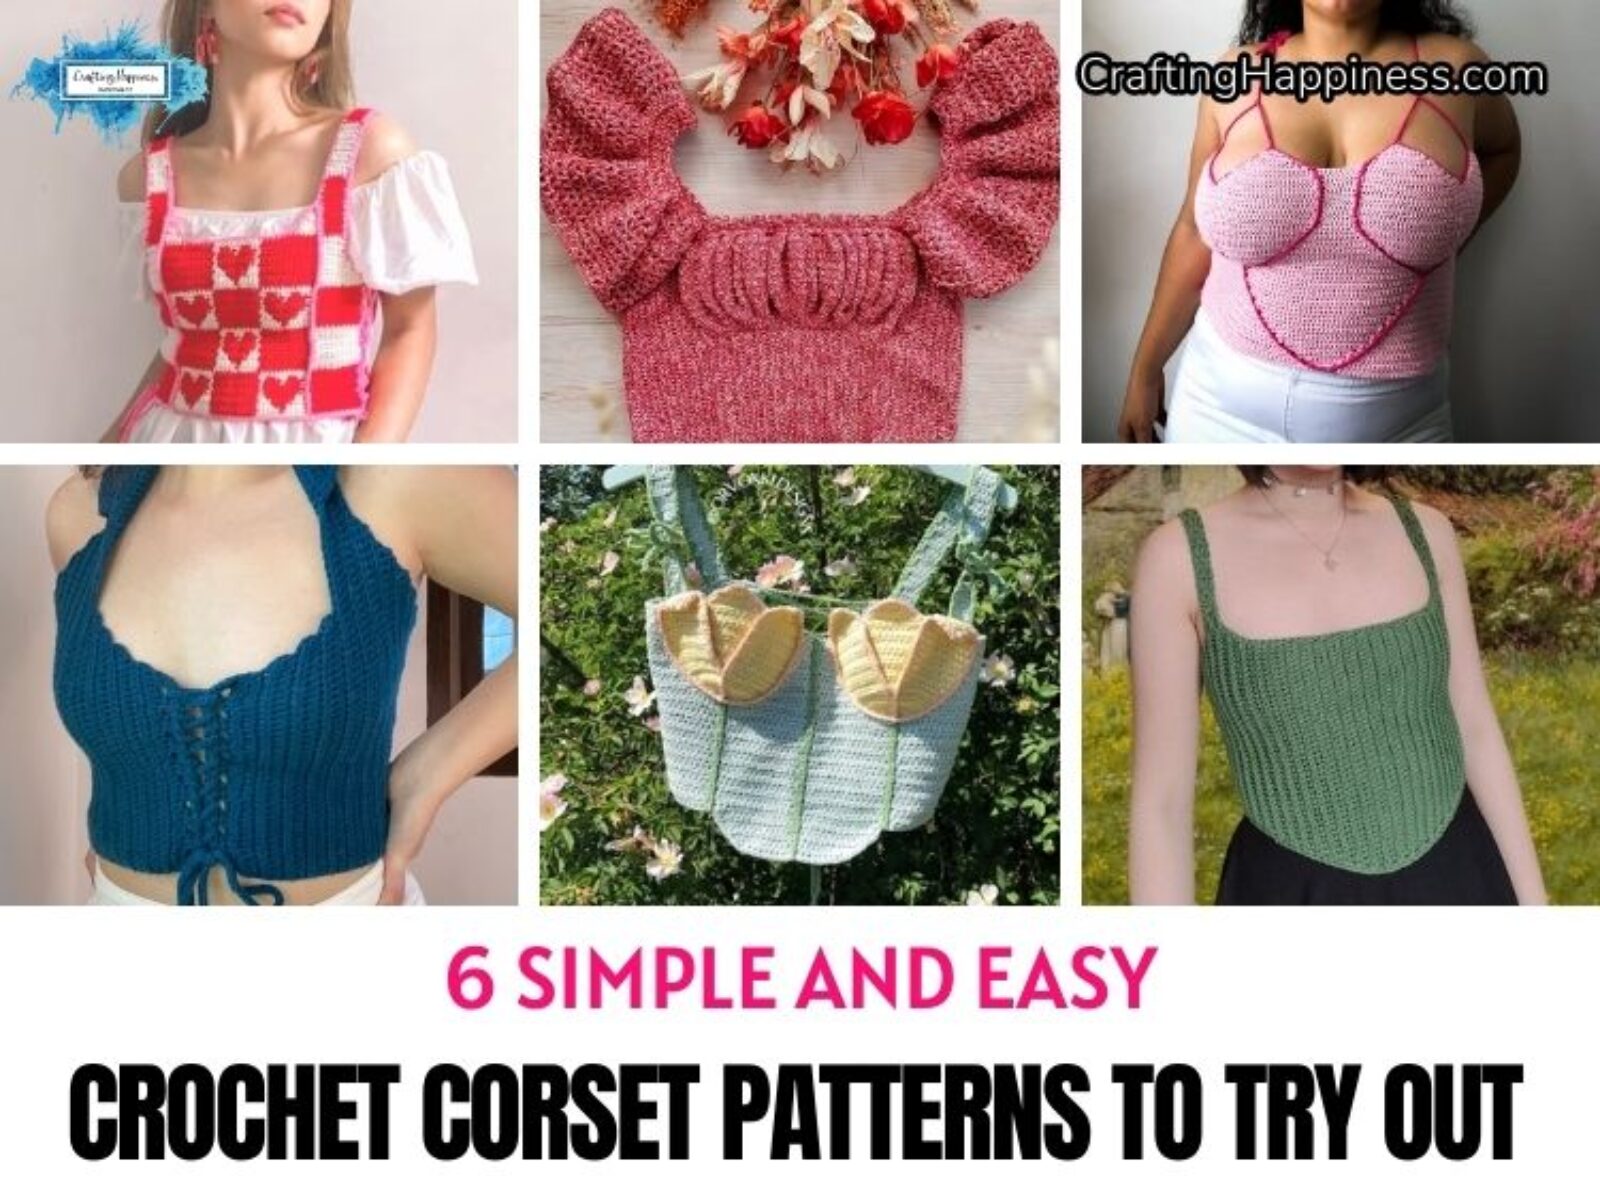 FB POSTER - 6 Simple And Easy Crochet Corset Patterns To Try Out - Crafting Happiness